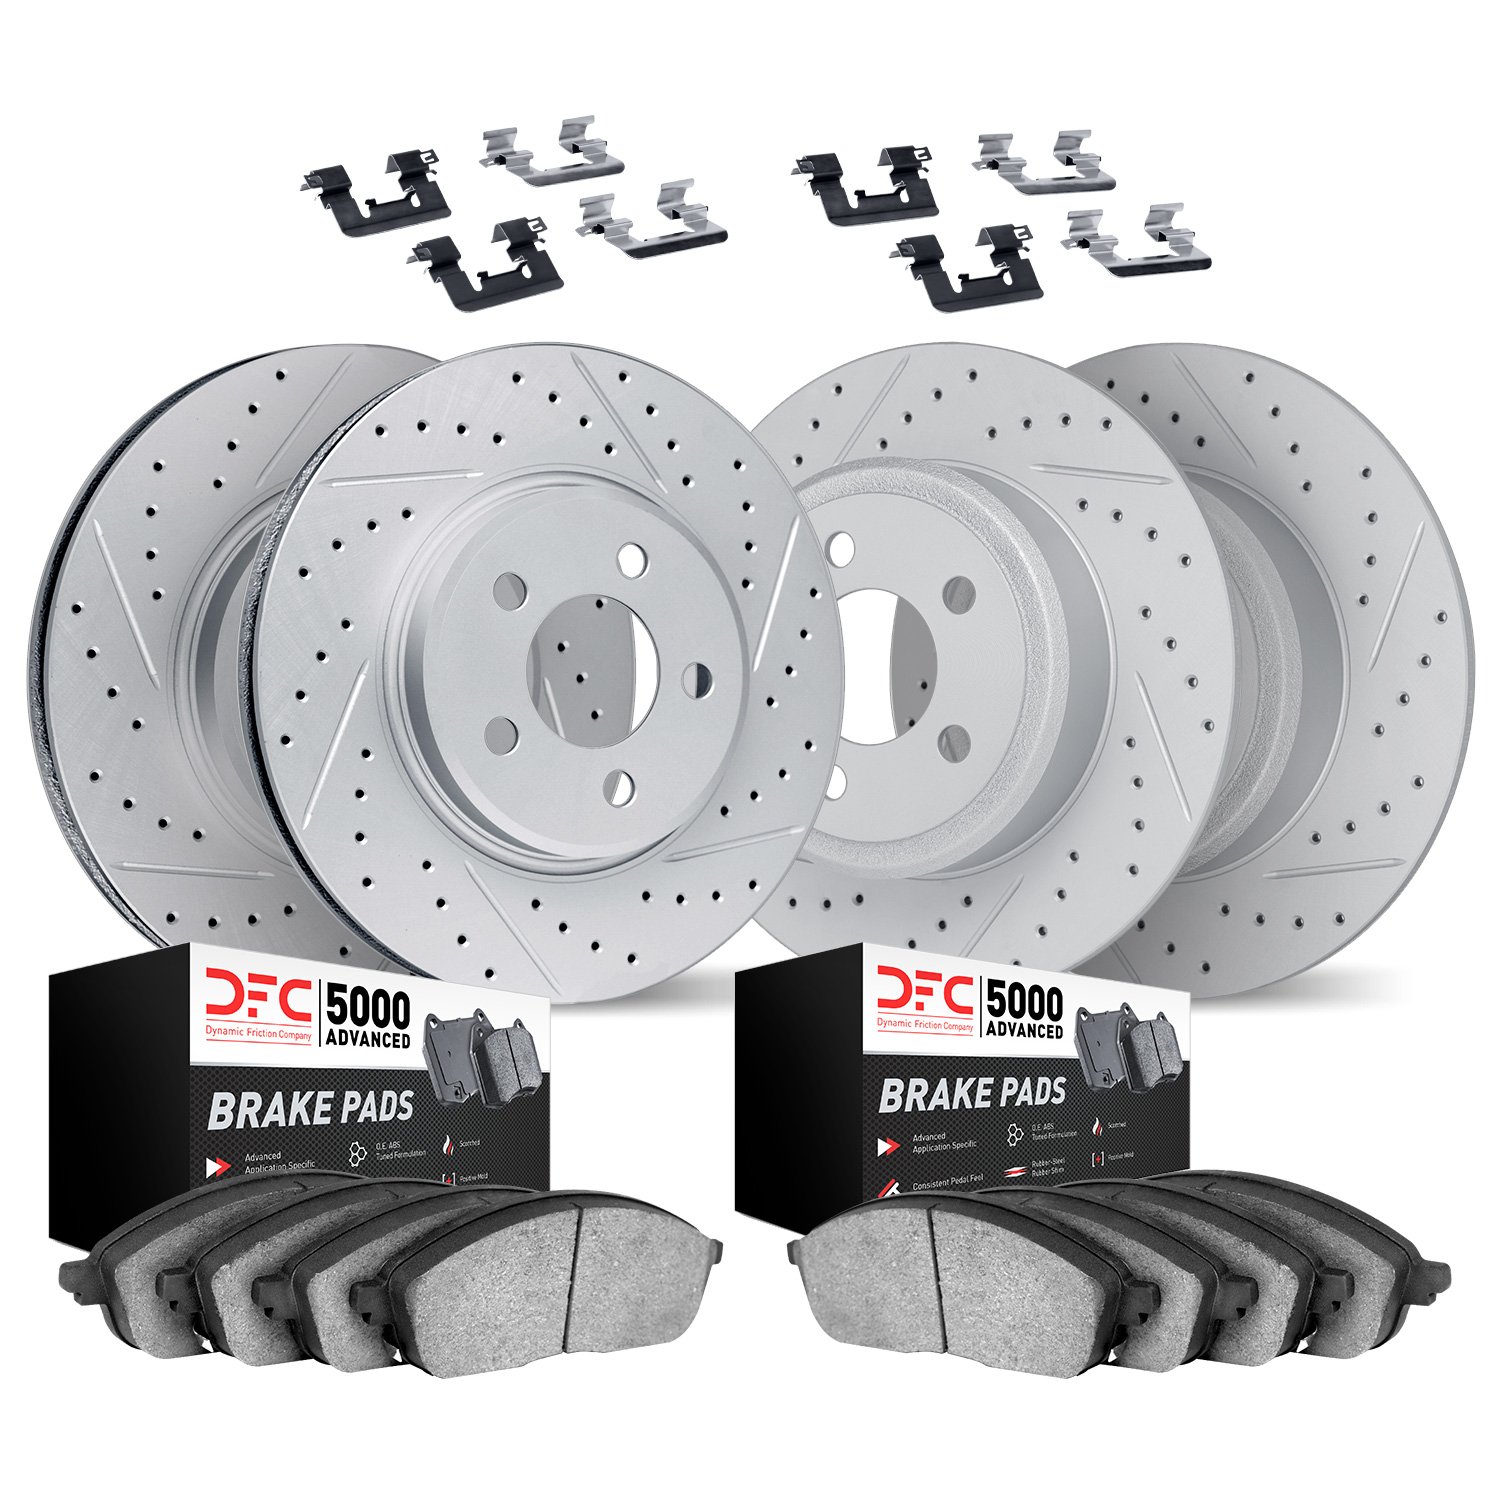 2514-27006 Geoperformance Drilled/Slotted Rotors w/5000 Advanced Brake Pads Kit & Hardware, 2004-2013 Volvo, Position: Front and